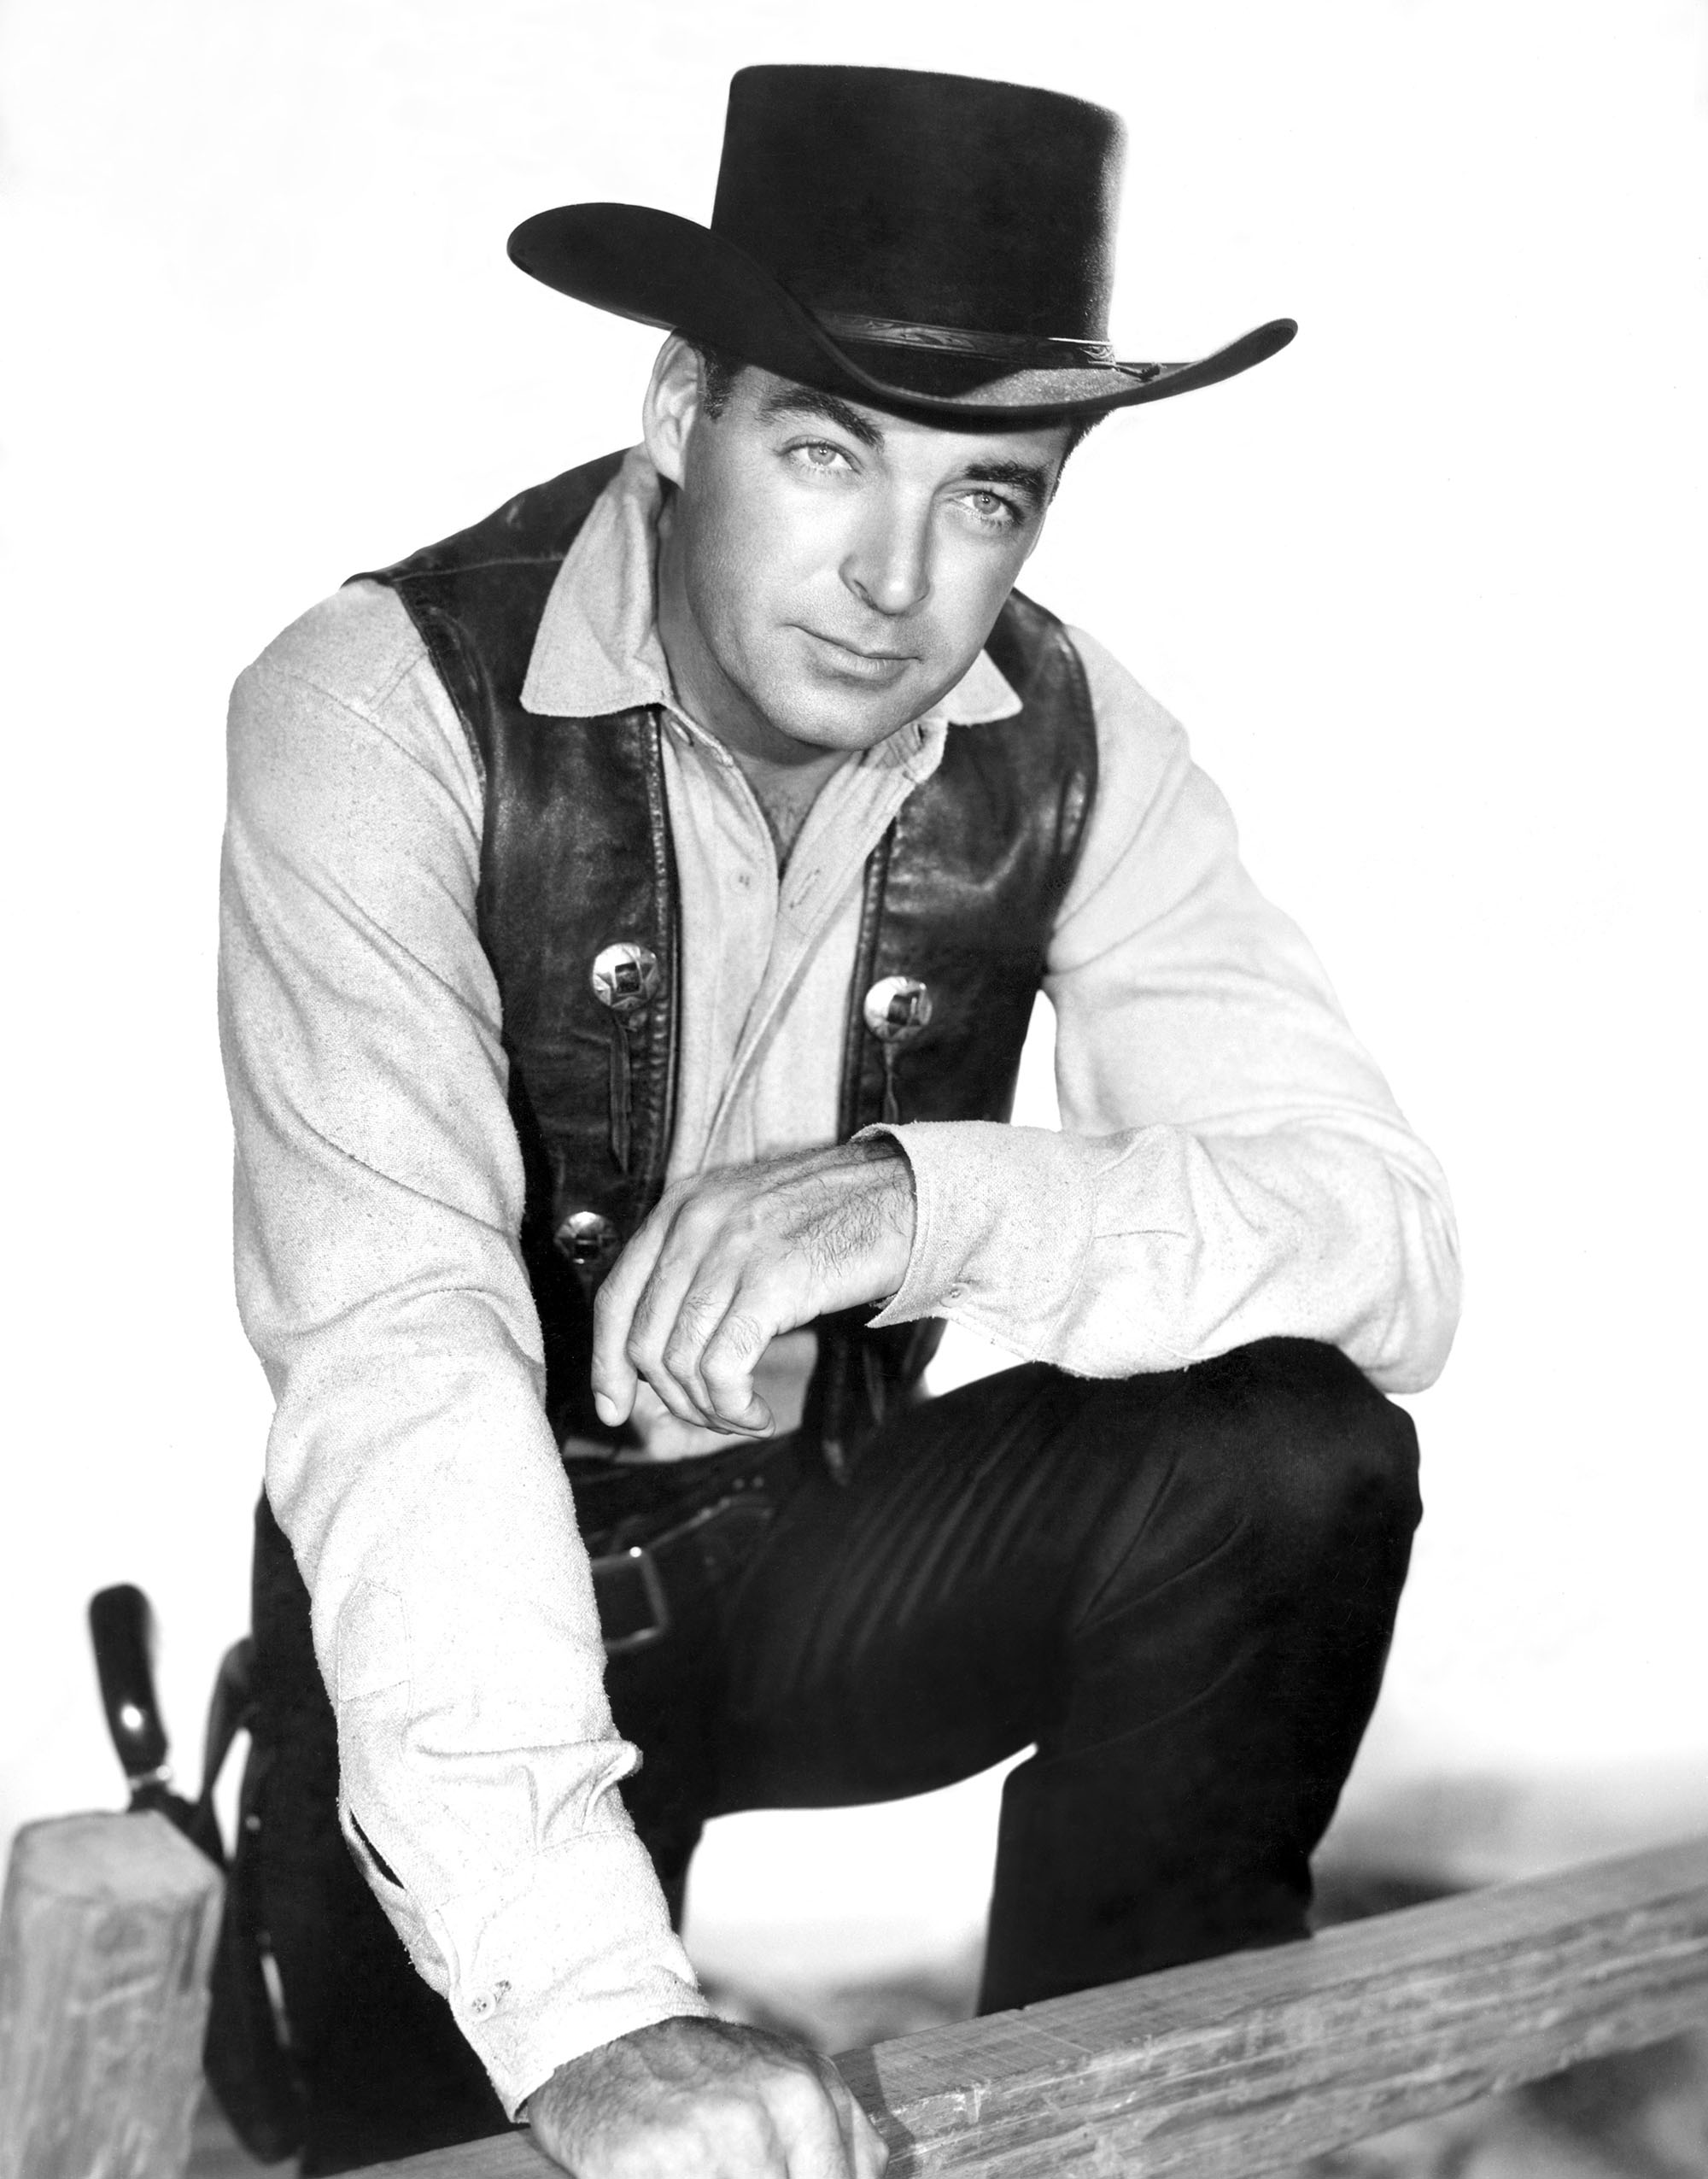 black and white image from the 1958-60 Western TV series "The Texan." It shows star Rory Calhoun dressed as an old west lawman, with hat, leather vest, holster with gun. 